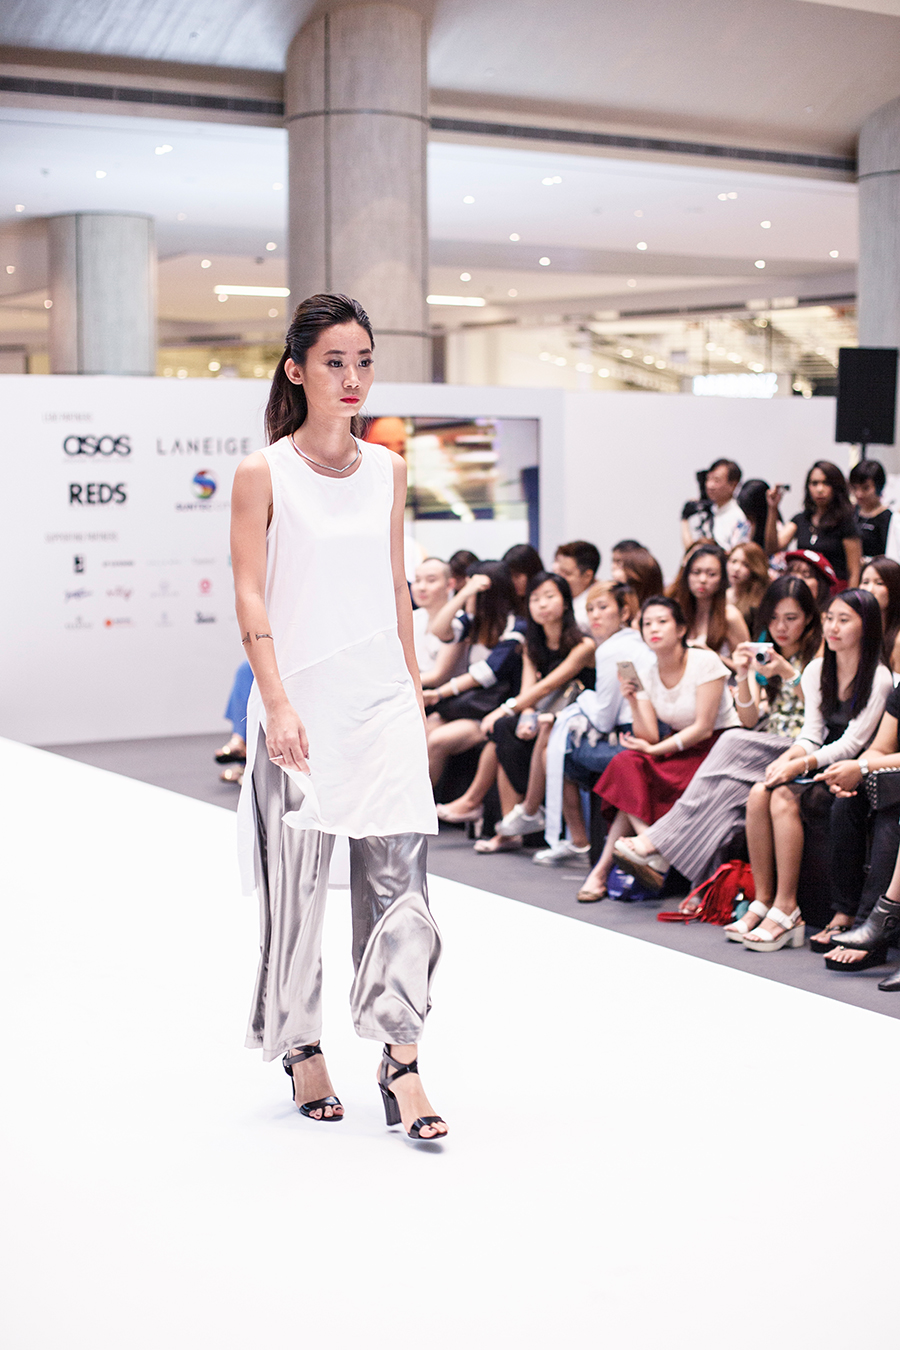 Modern Muse Catwalk at Clozette Style Party 2016 in Suntec City. #ClozetteStyleParty